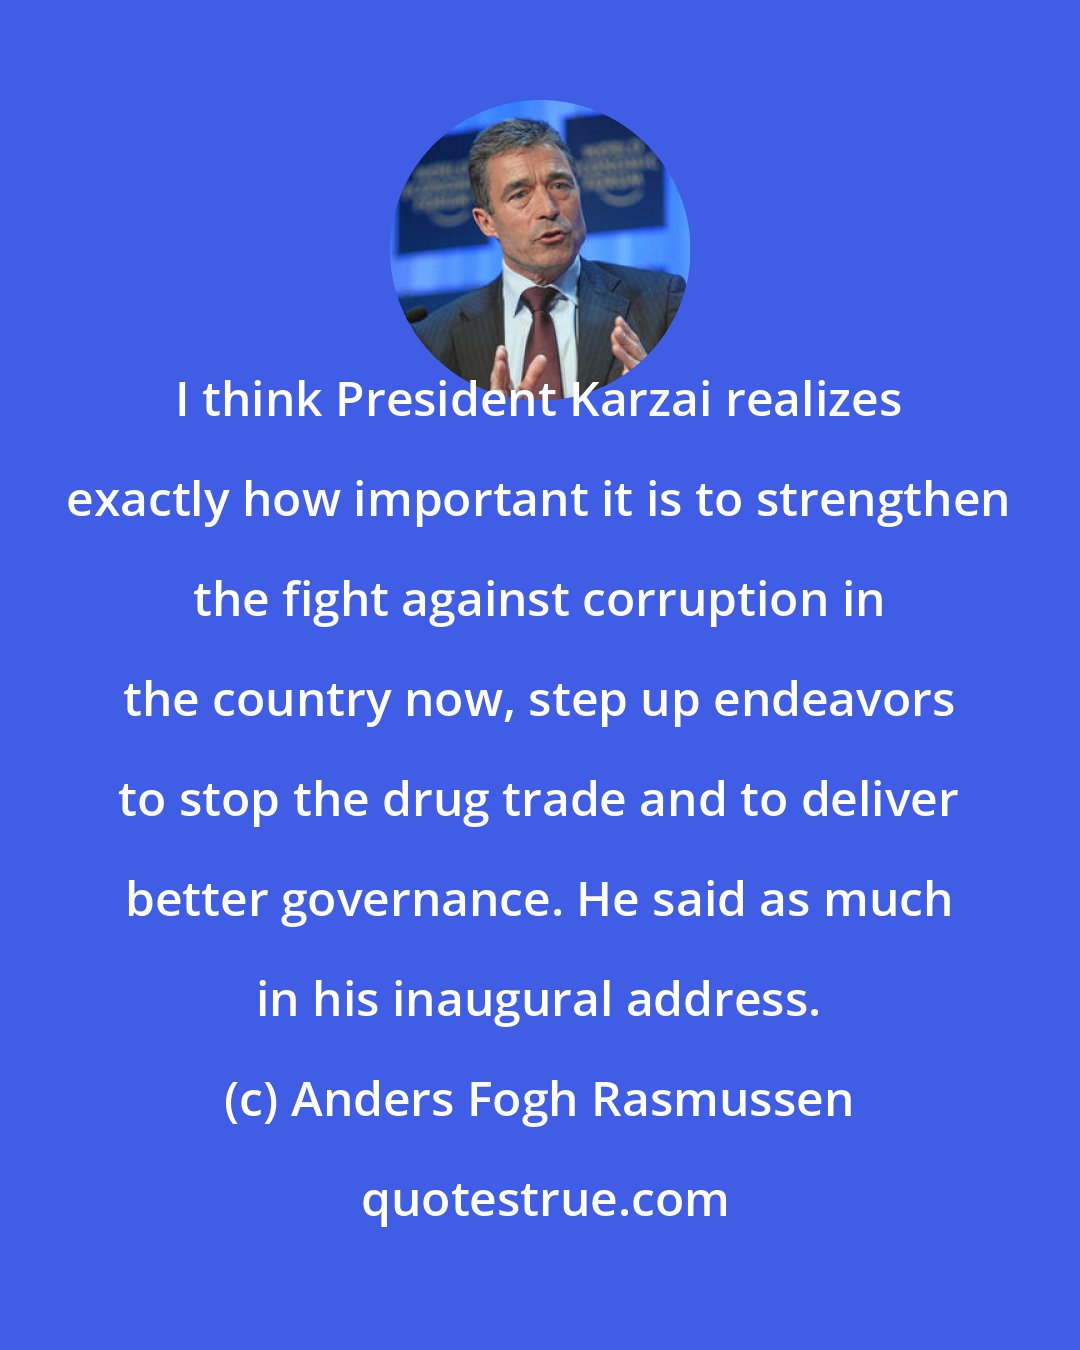 Anders Fogh Rasmussen: I think President Karzai realizes exactly how important it is to strengthen the fight against corruption in the country now, step up endeavors to stop the drug trade and to deliver better governance. He said as much in his inaugural address.